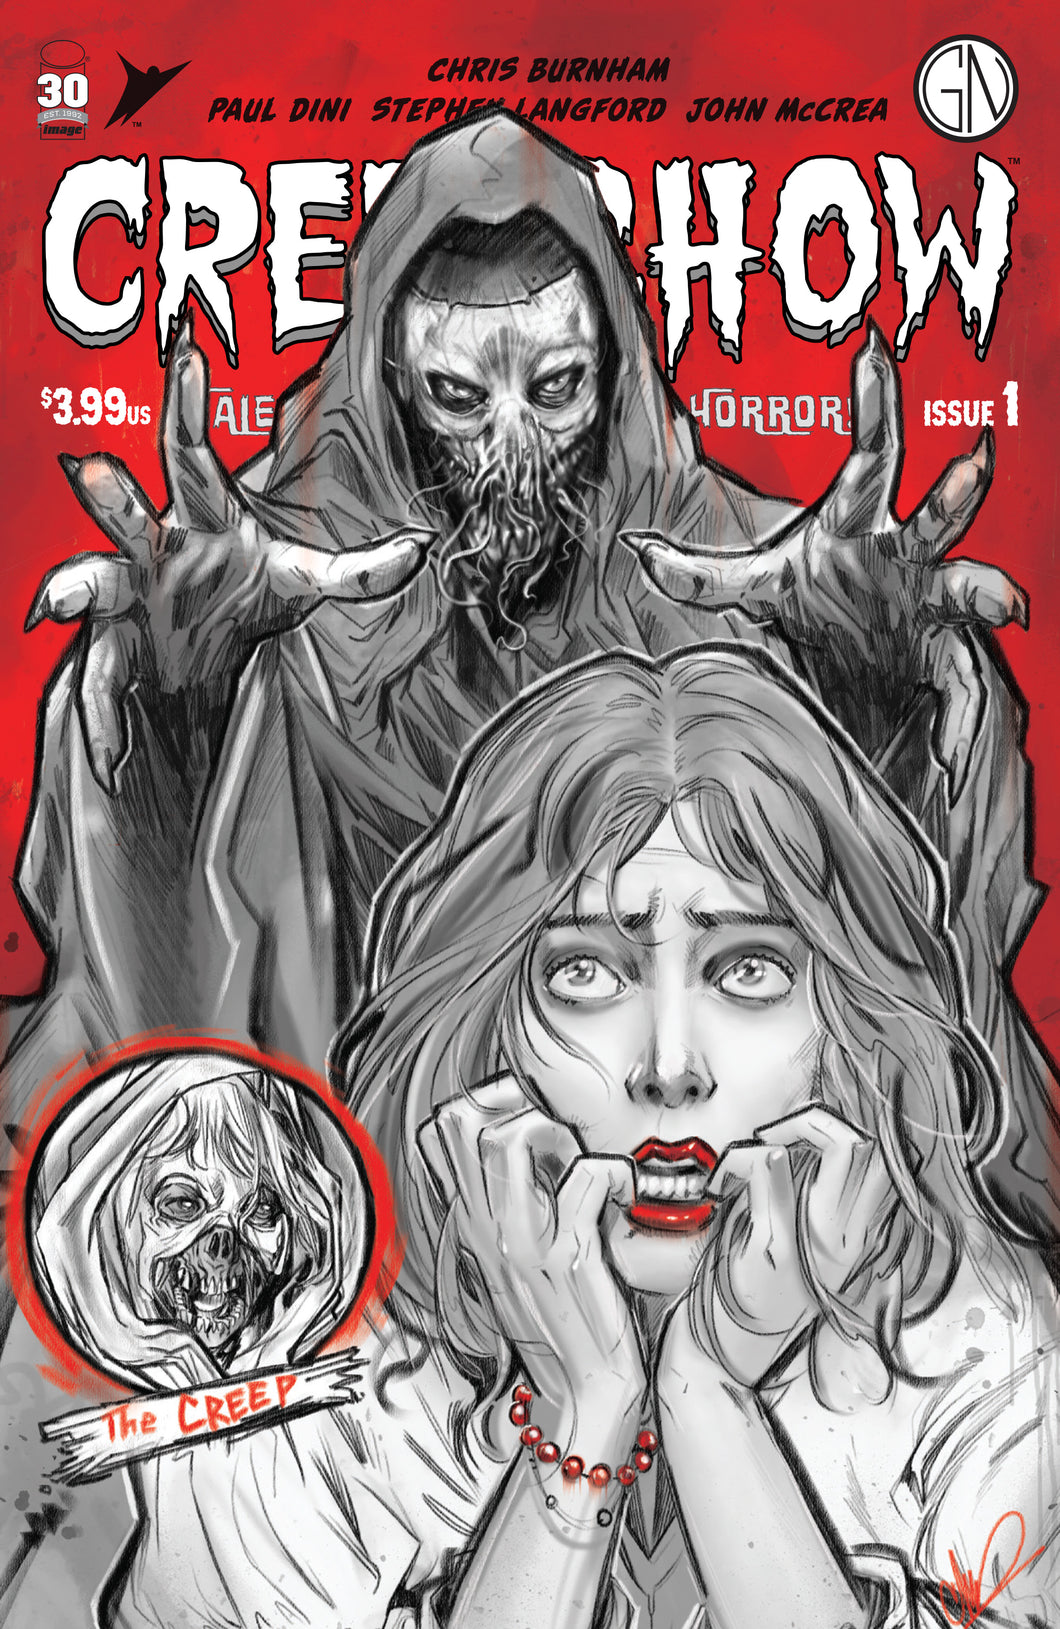 CREEPSHOW #1 - COLLECTORS CHOICE COMICS STORE EXCLUSIVE by CHINH POTTER!